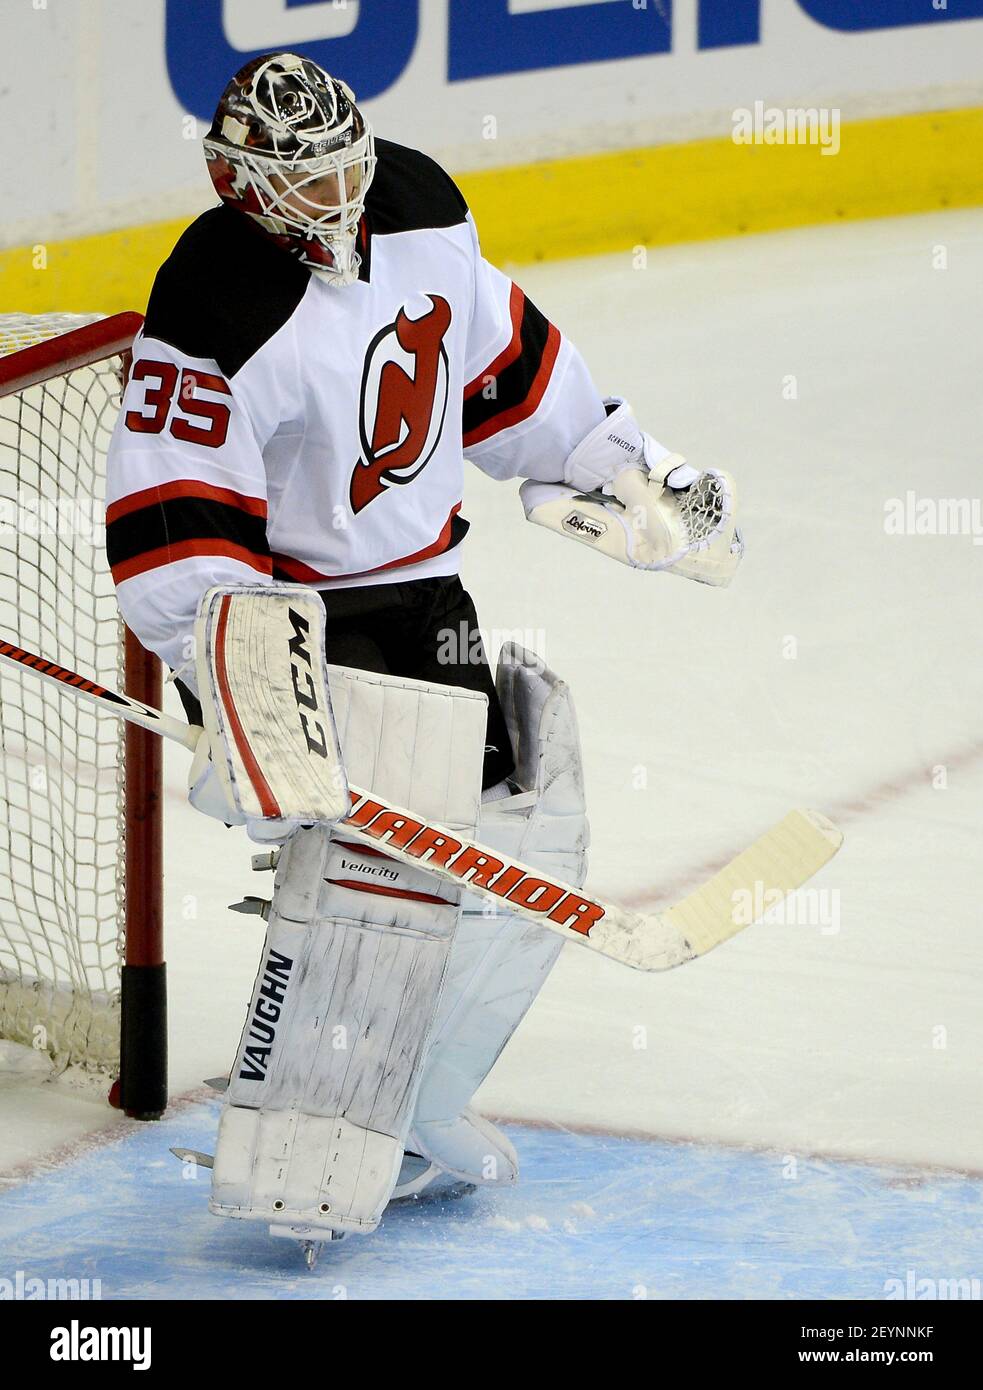 New Jersey Devils goalie Cory Schneider (35) warms up before the game  against the Washington Capitals at the Verizon Center in Washington,  Saturday, Dec. 21, 2013. Schneider is among the American players